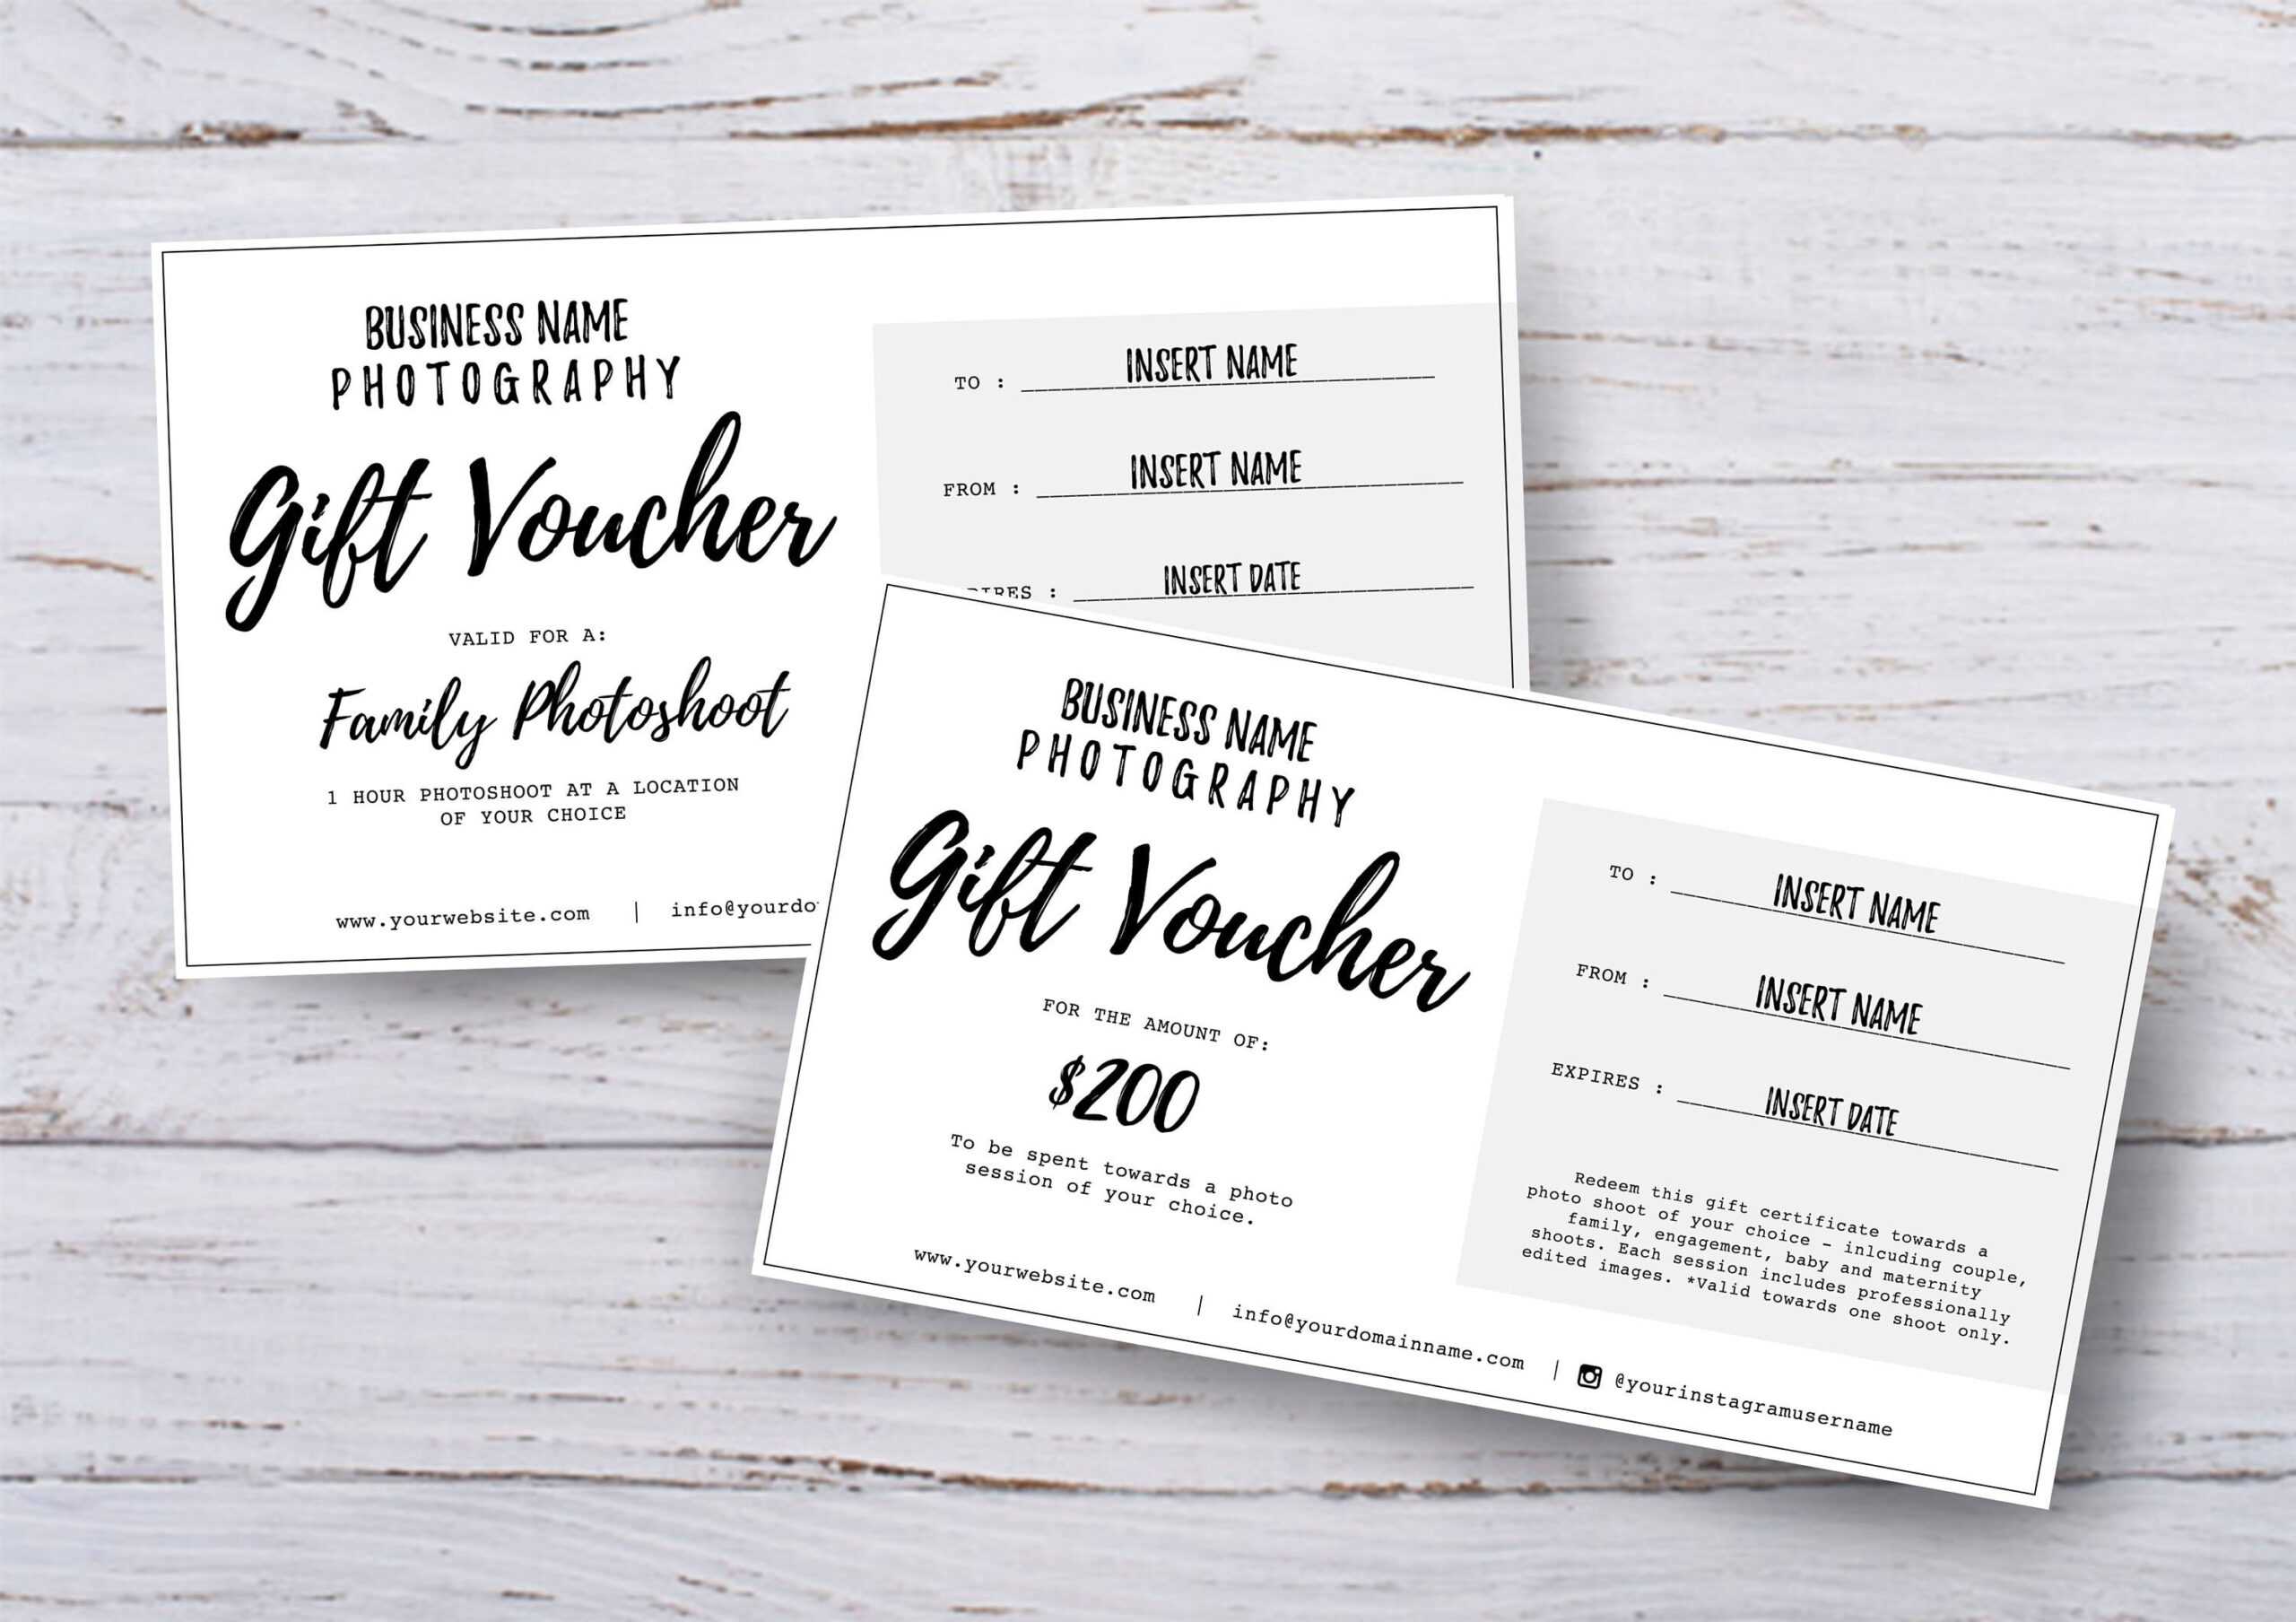 Photography Gift Voucher Certificate Template Psd For Photoshop X 2 Throughout Photoshoot Gift Certificate Template